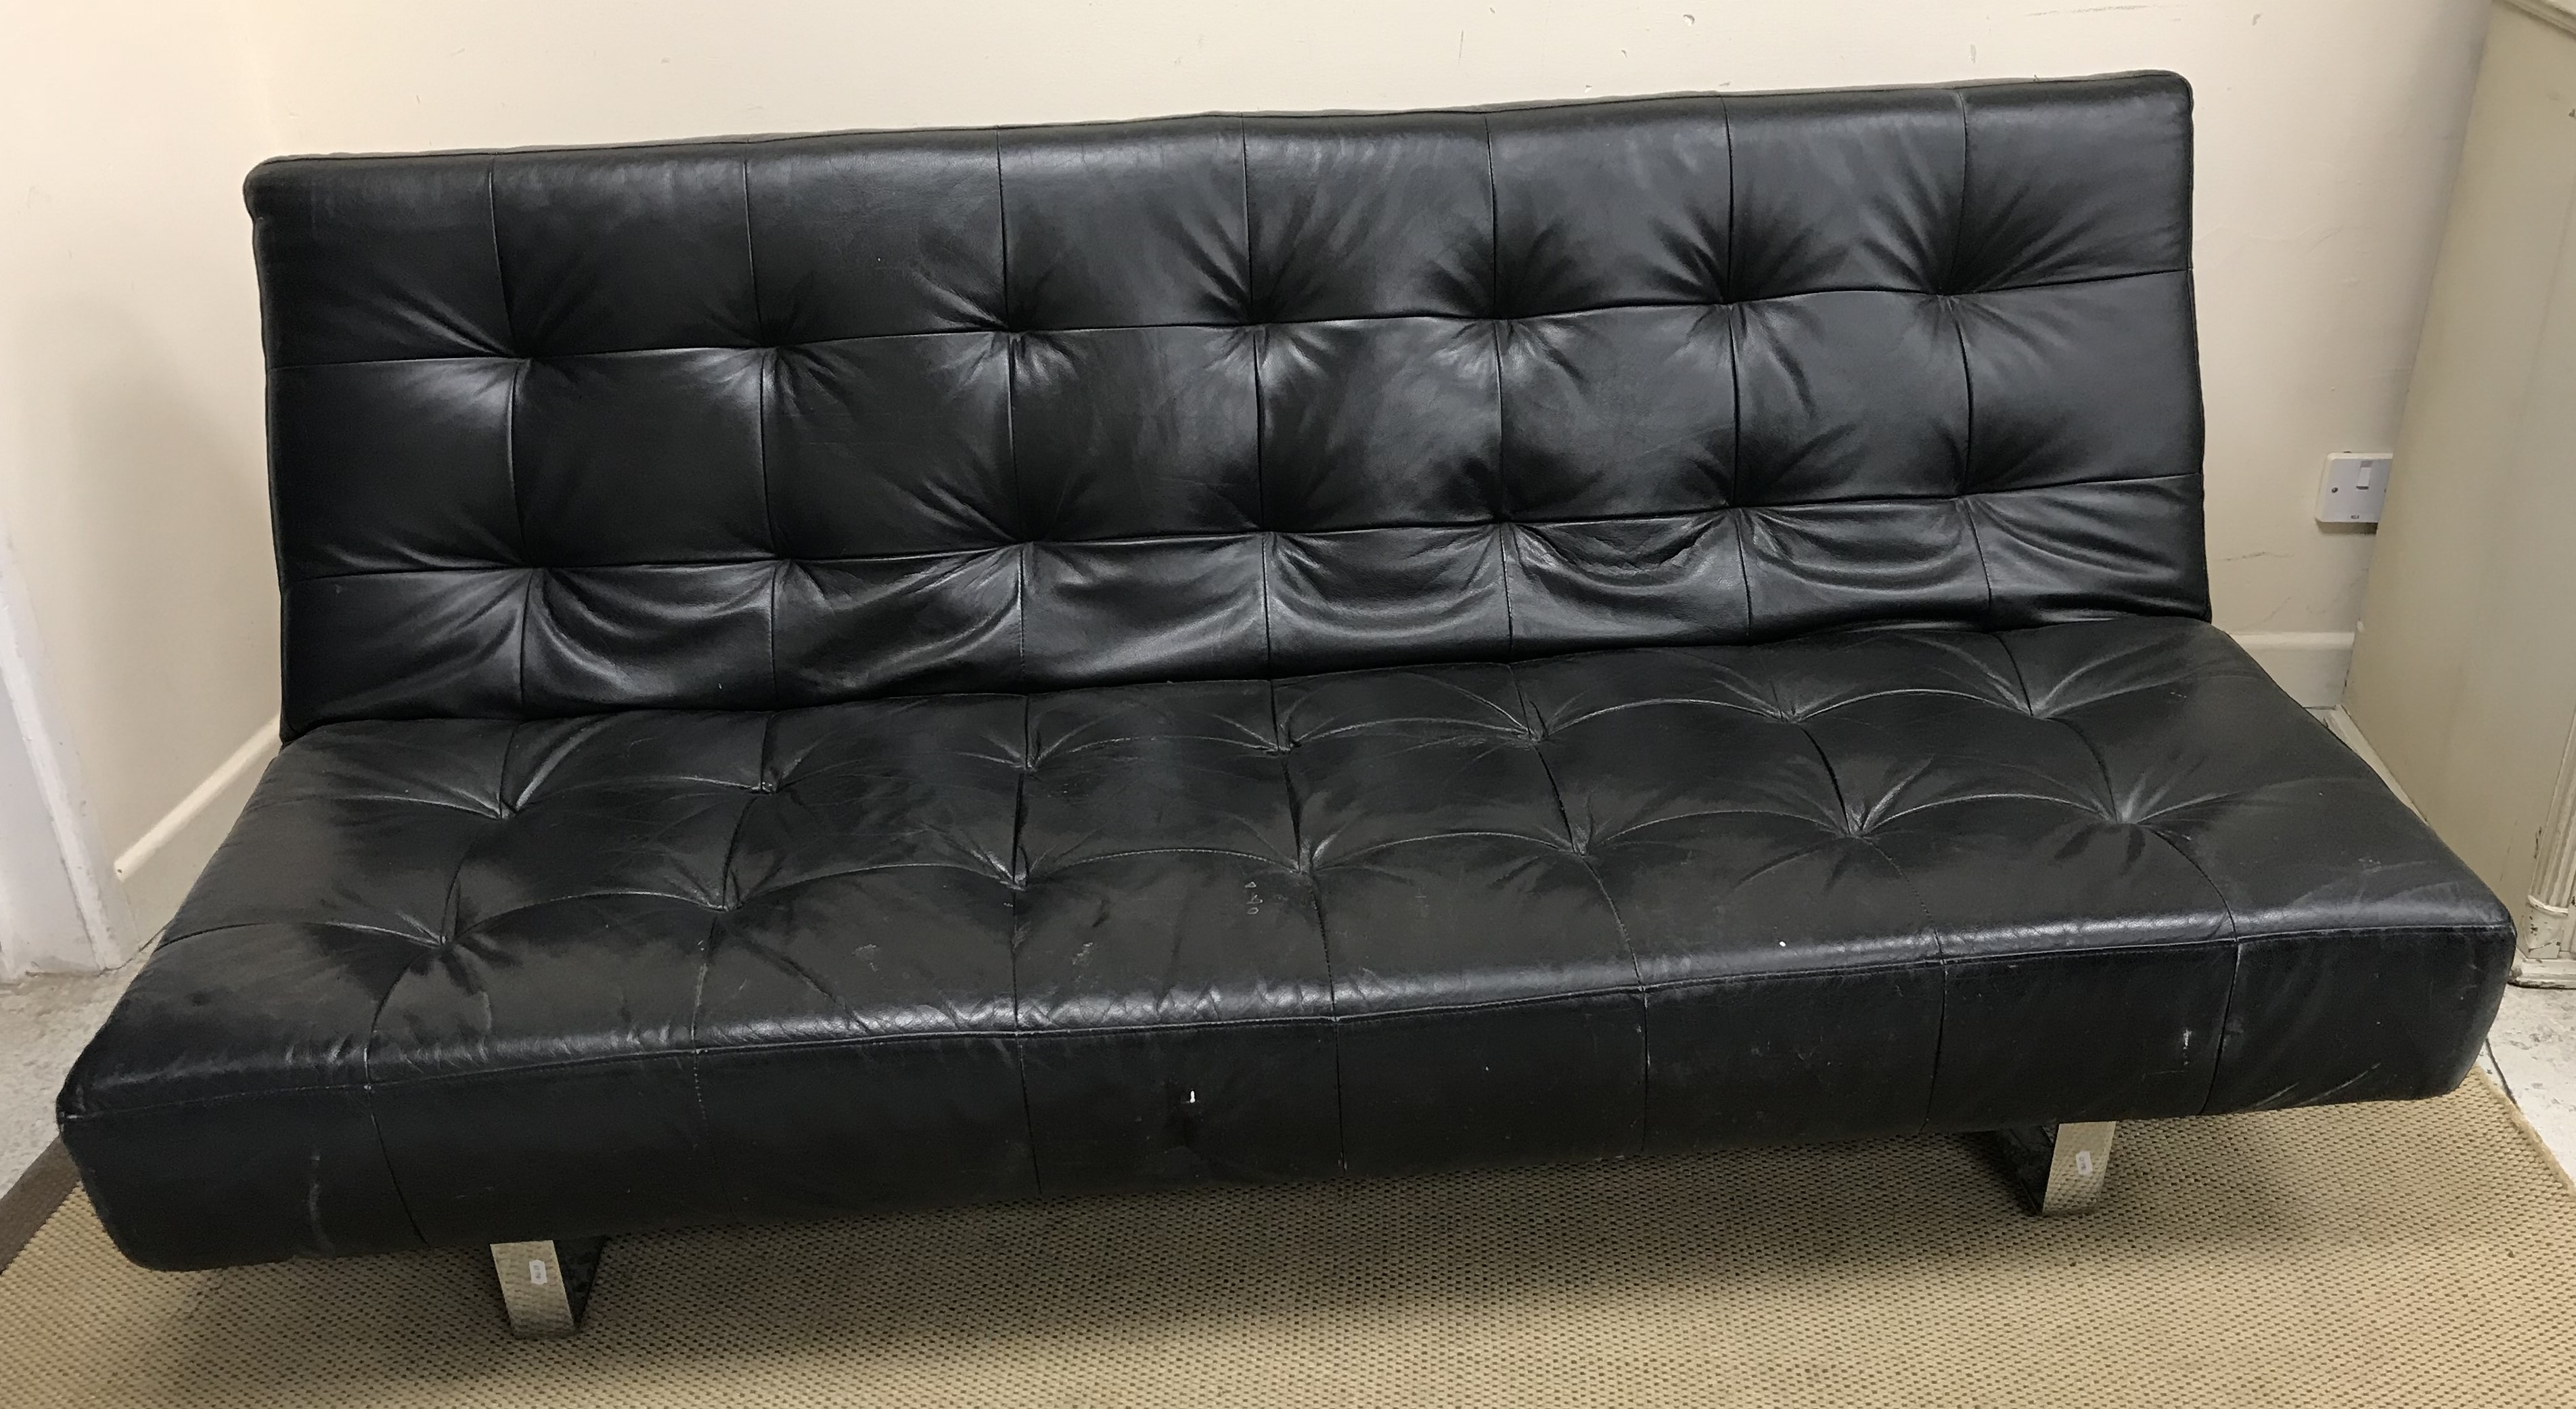 A modern black leather sofa on chromed legs, the back folding down to convert to a bed,